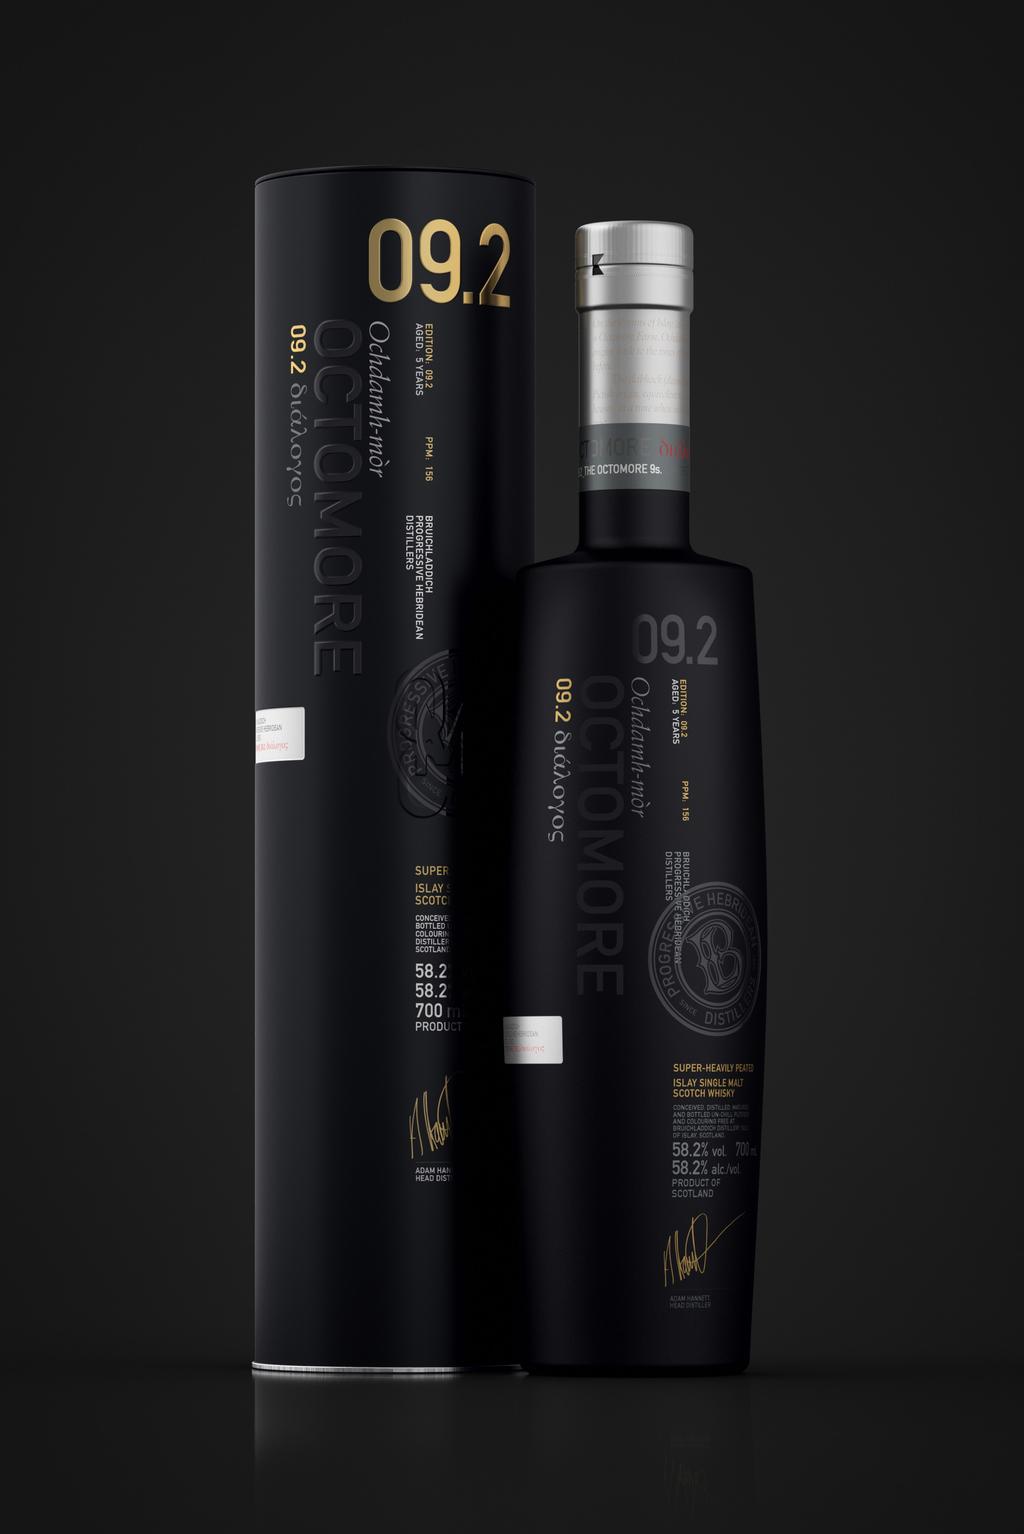 EDITION: 09.2 PPM: 156 AGED: 5 YEARS AMERICAN & EUROPEAN OAK MATURATION. 09.2 διάλογος THE INDEPENDENT VARIABLE. As with all great experiments, one variable must change. Octomore 09.